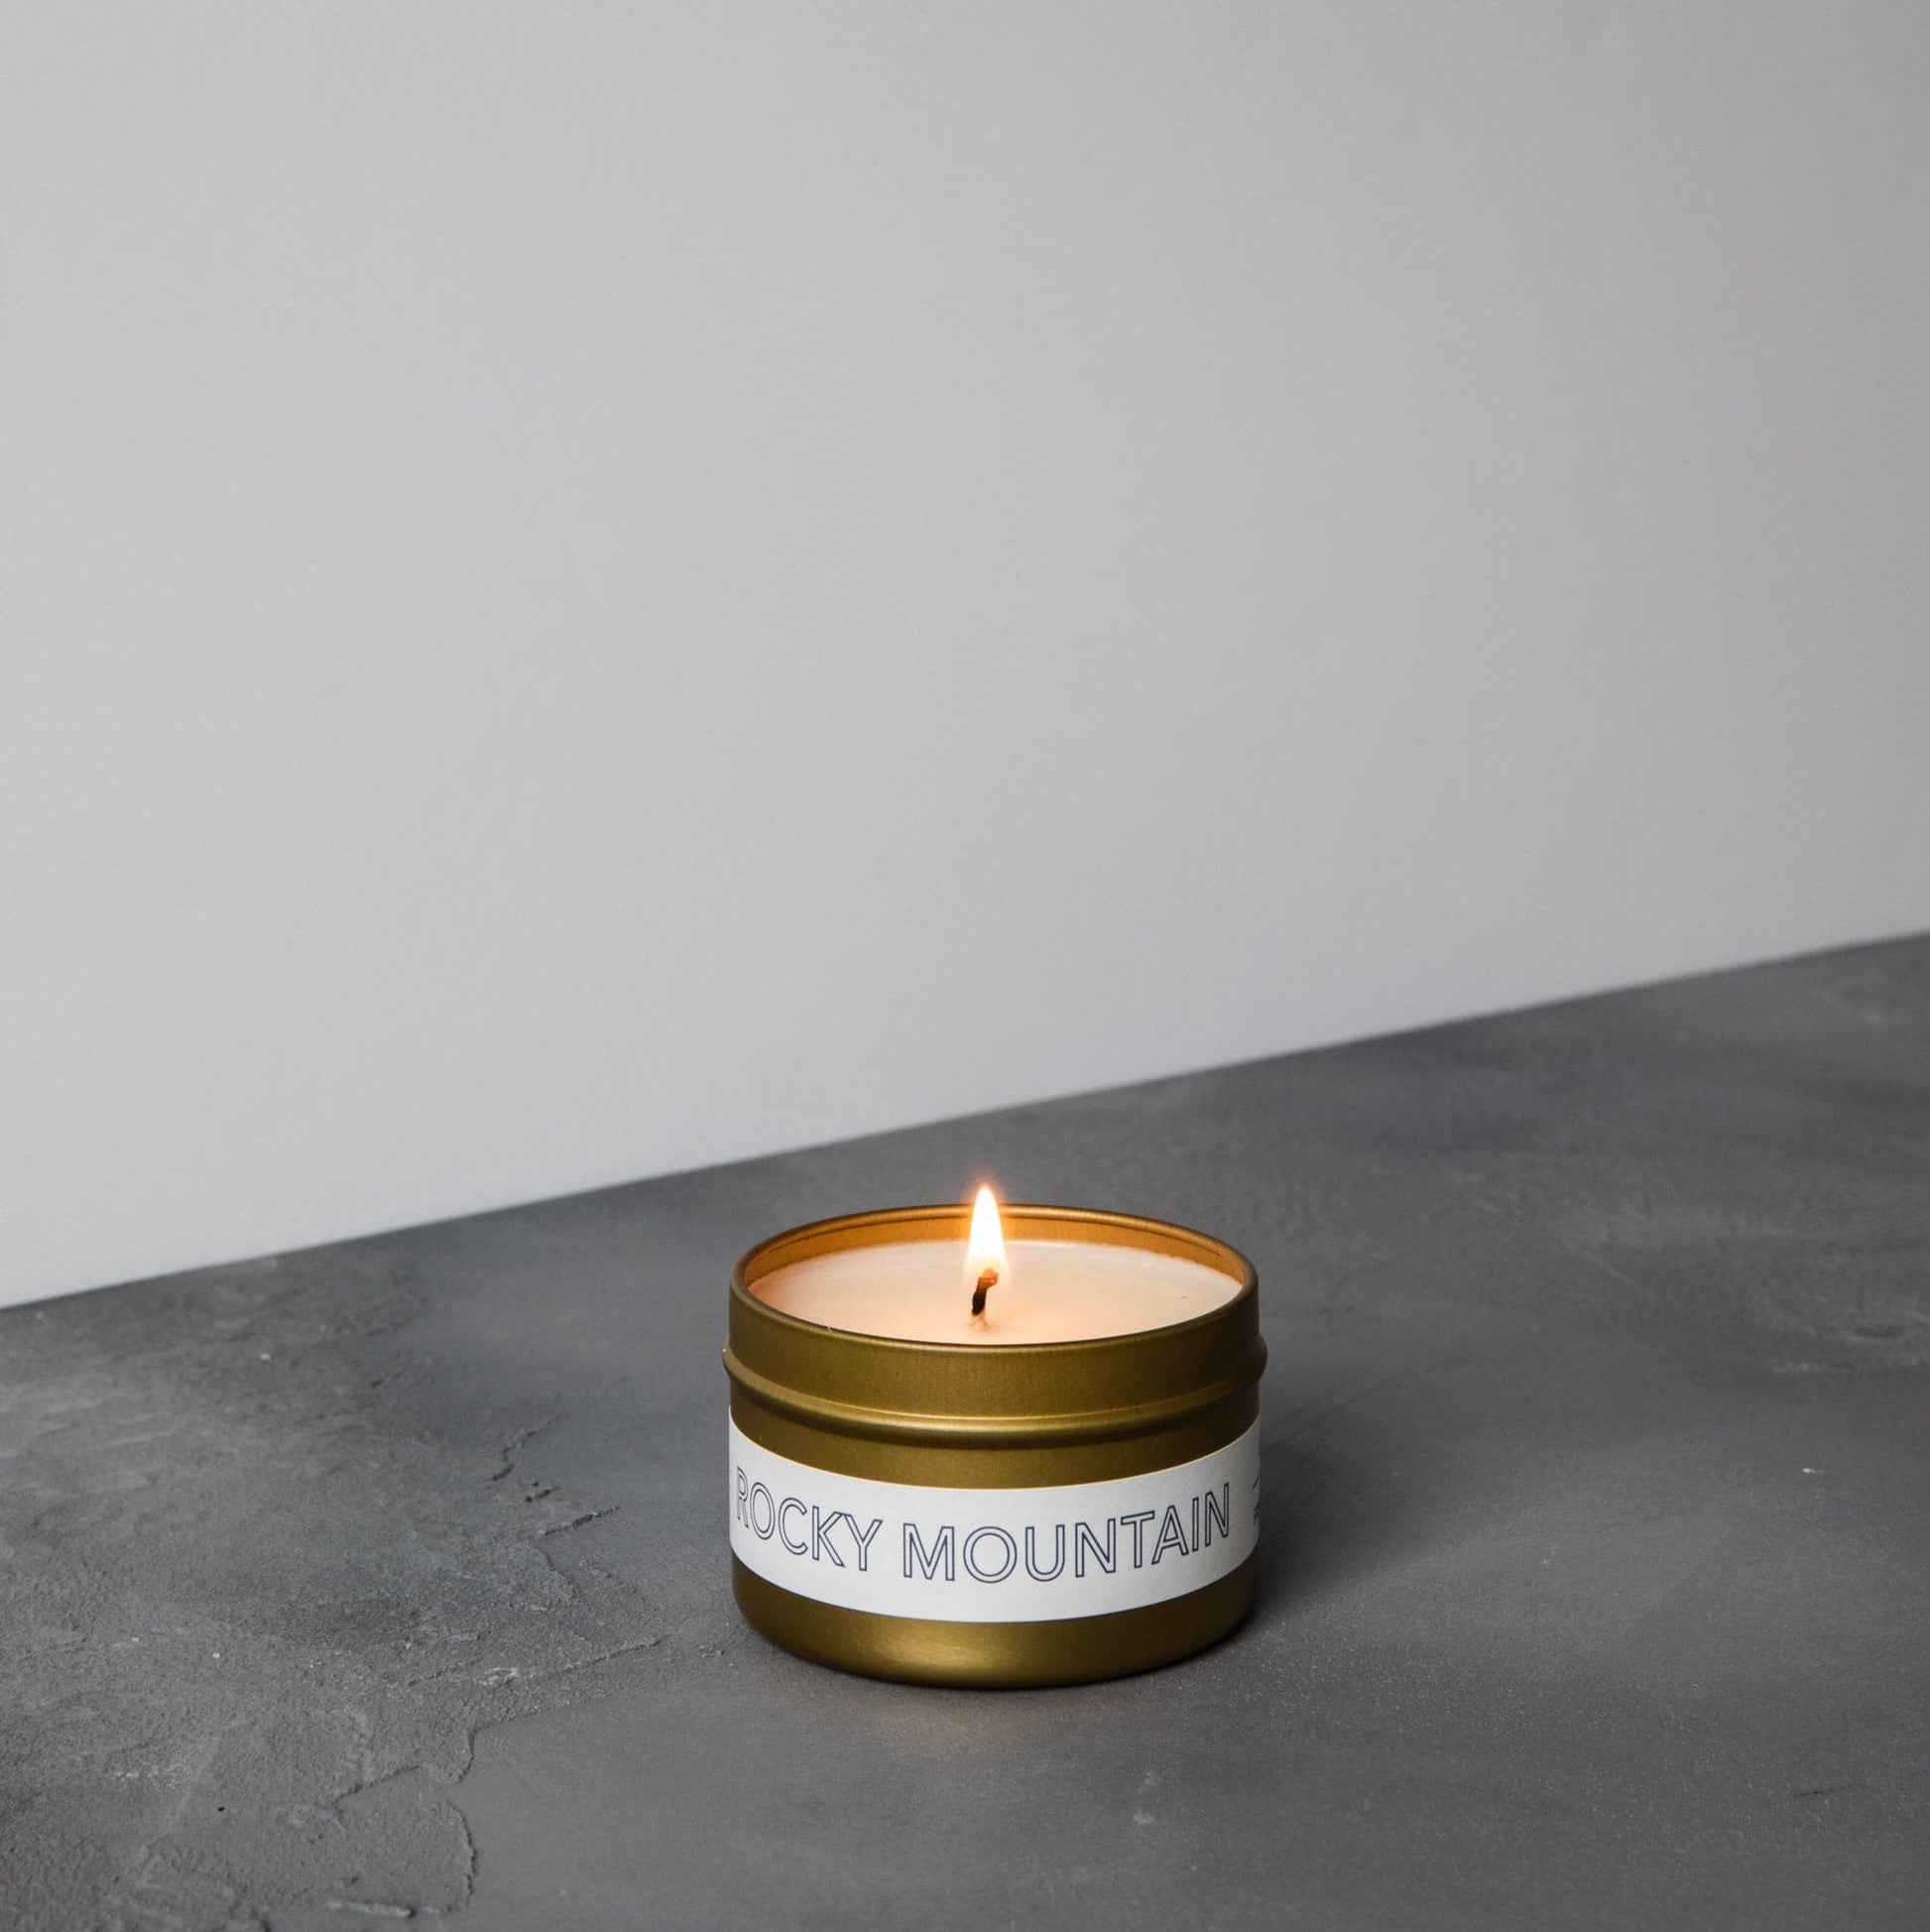 Rocky Mountain Travel Candle - The Roosevelts Candle Co.